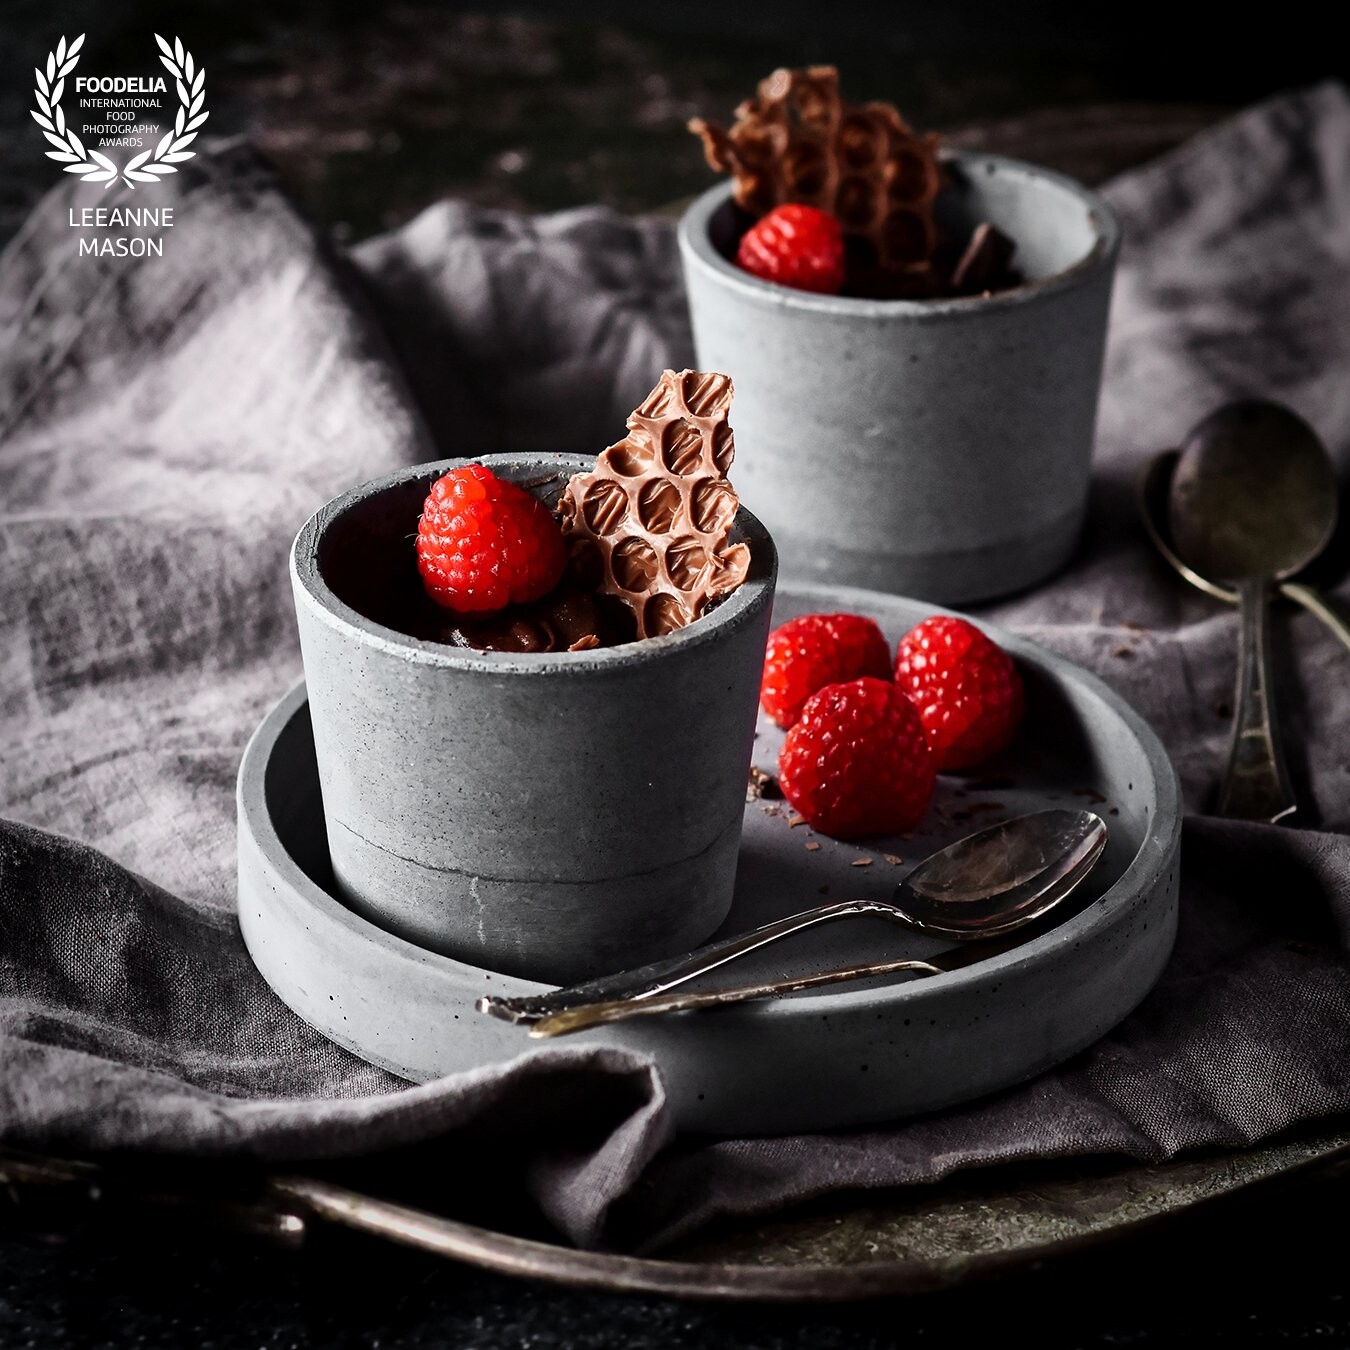 I love capturing the unusual and when I found this Chocolate Bubble Wrap recipe it was a perfect fit for a delicious chocolate mousse garnished with raspberries.  The the pots and plate added texture and a cool colour palette to the image.